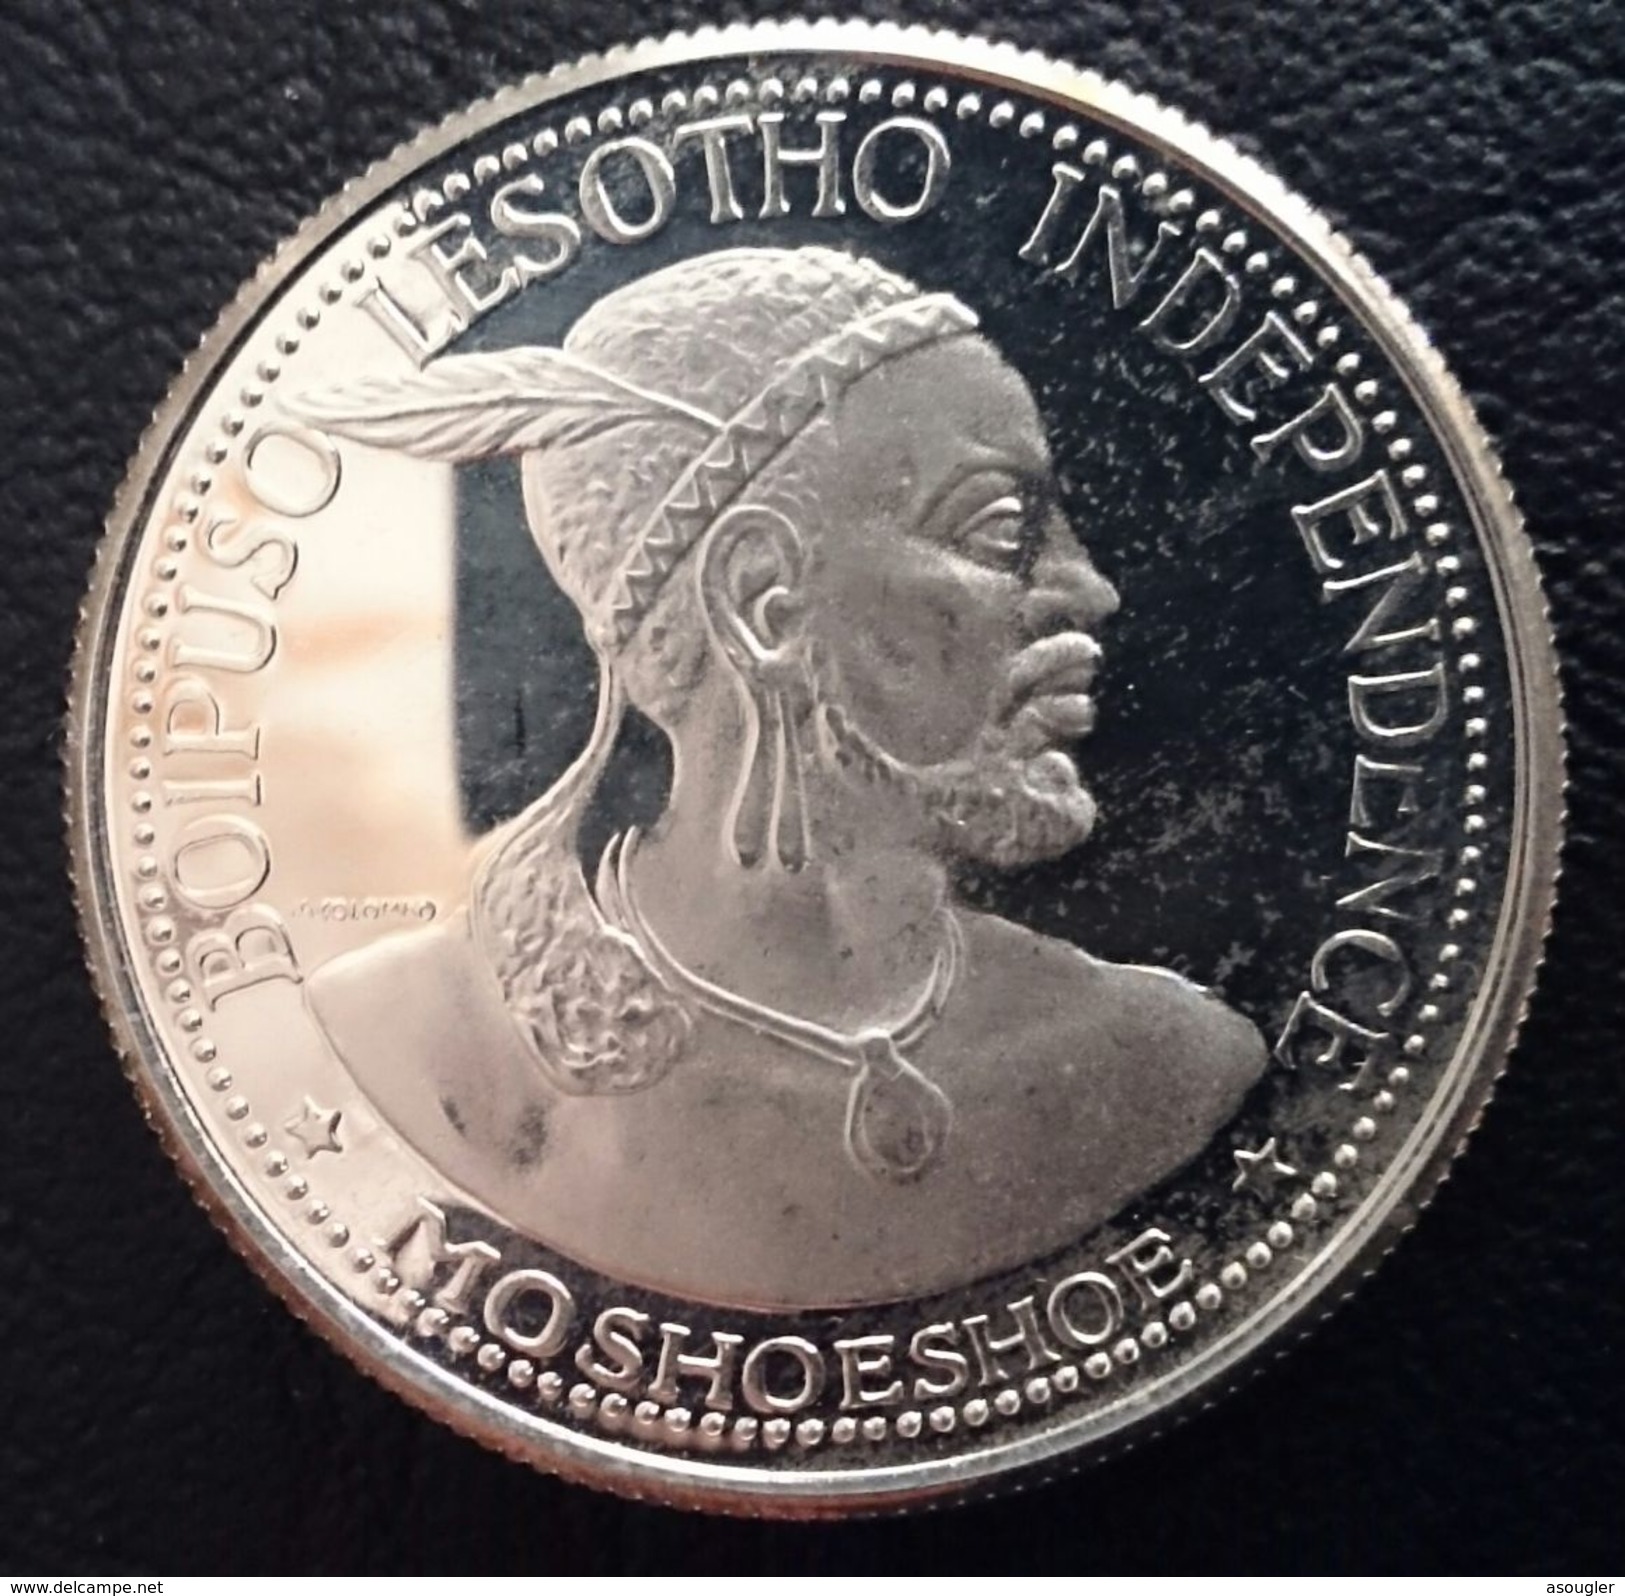 Lesotho 50 Licente 1966 Silver Proof "Independence Attained" Free Shipping Via Registered Air Mail - Lesotho